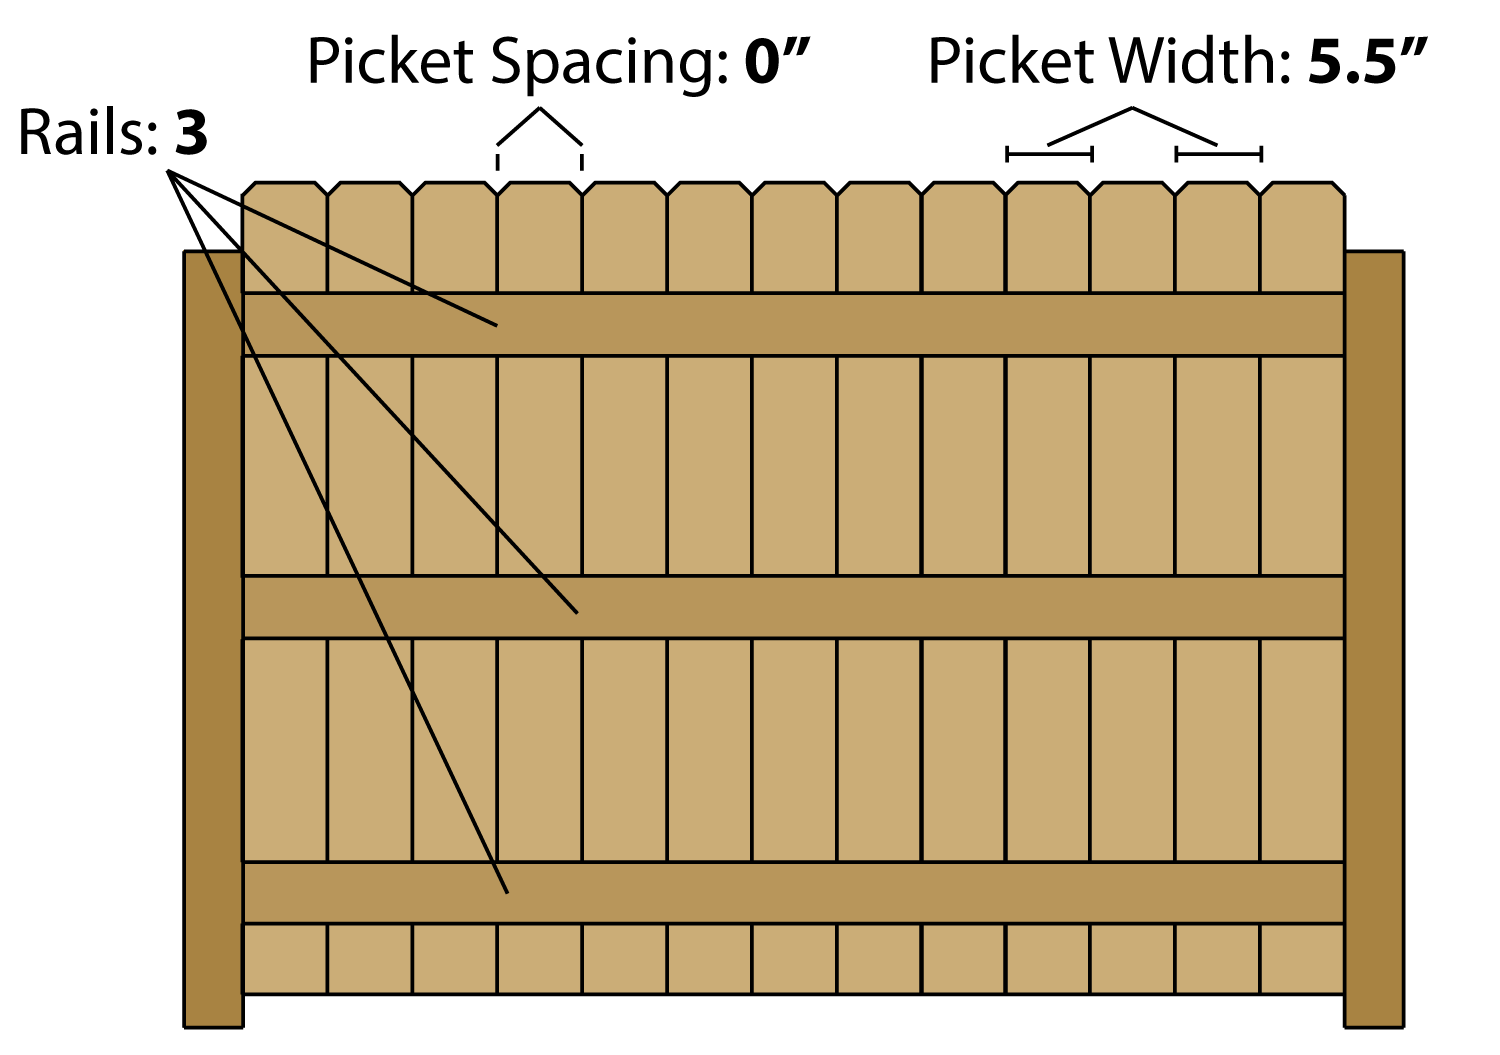 Illustration showing the design and lumber needed to build a solid wood fence